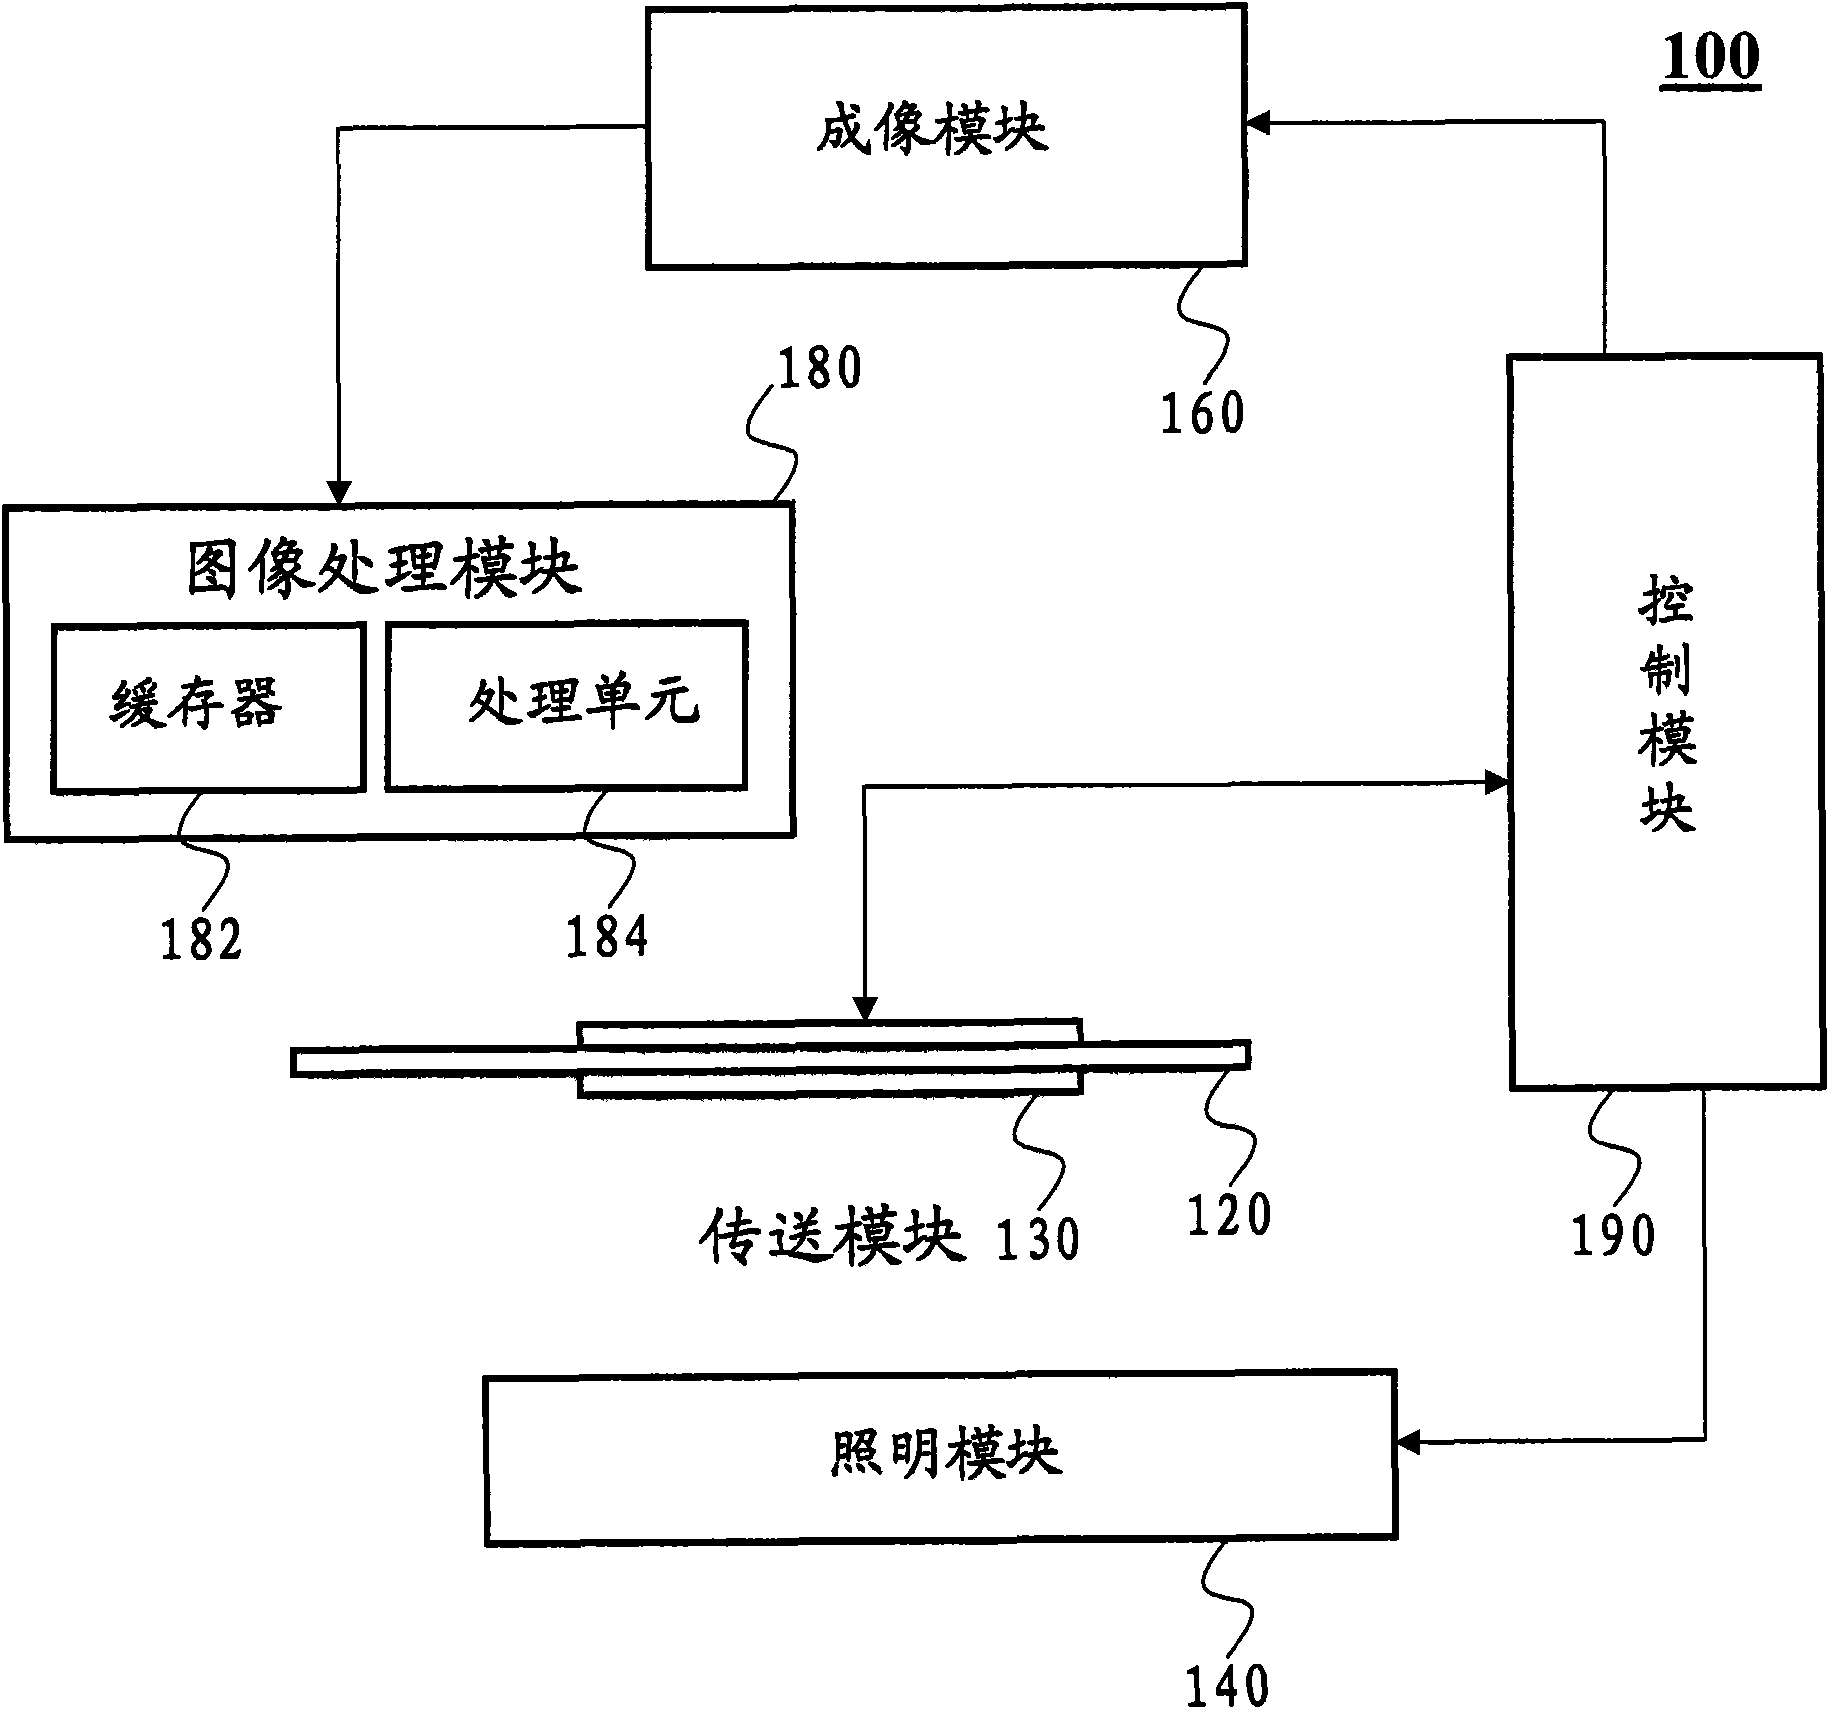 Method and system for detecting defect of patterned substrate